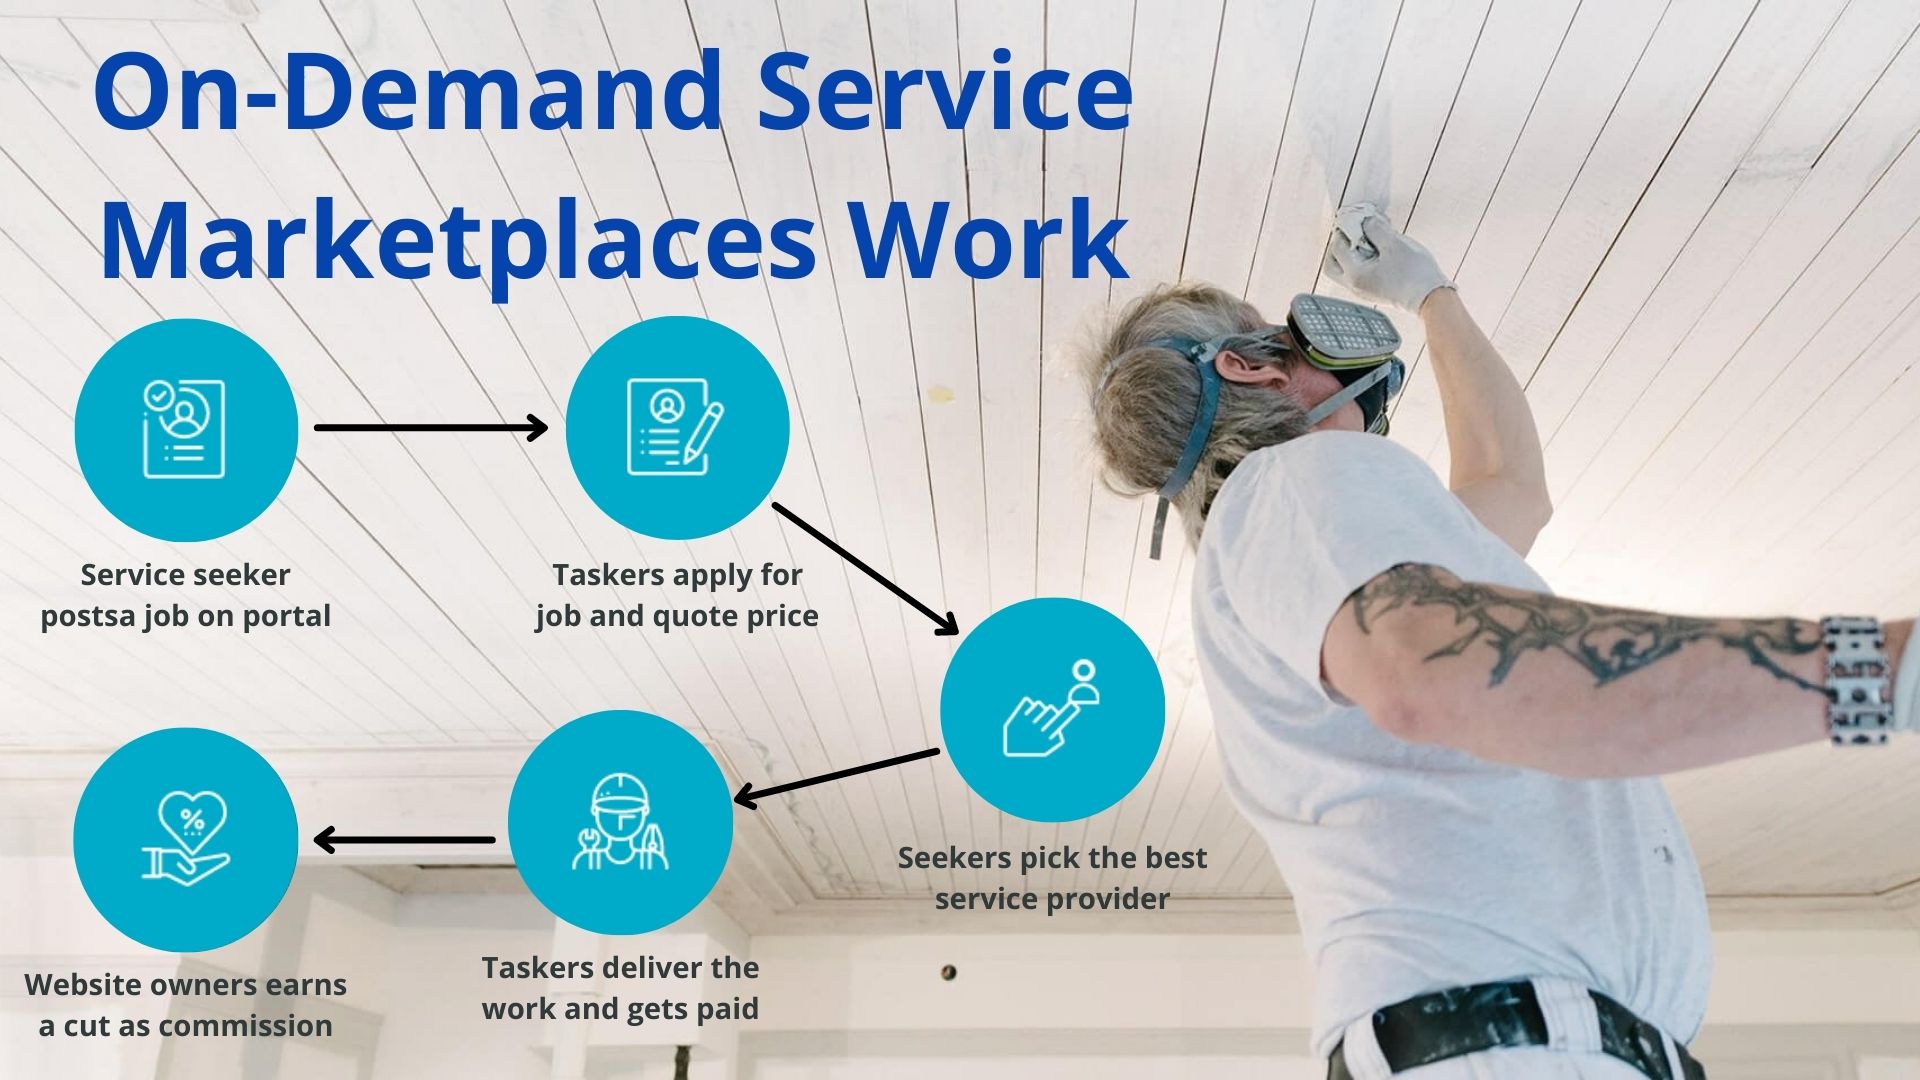 Building an On-Demand Services Marketplace